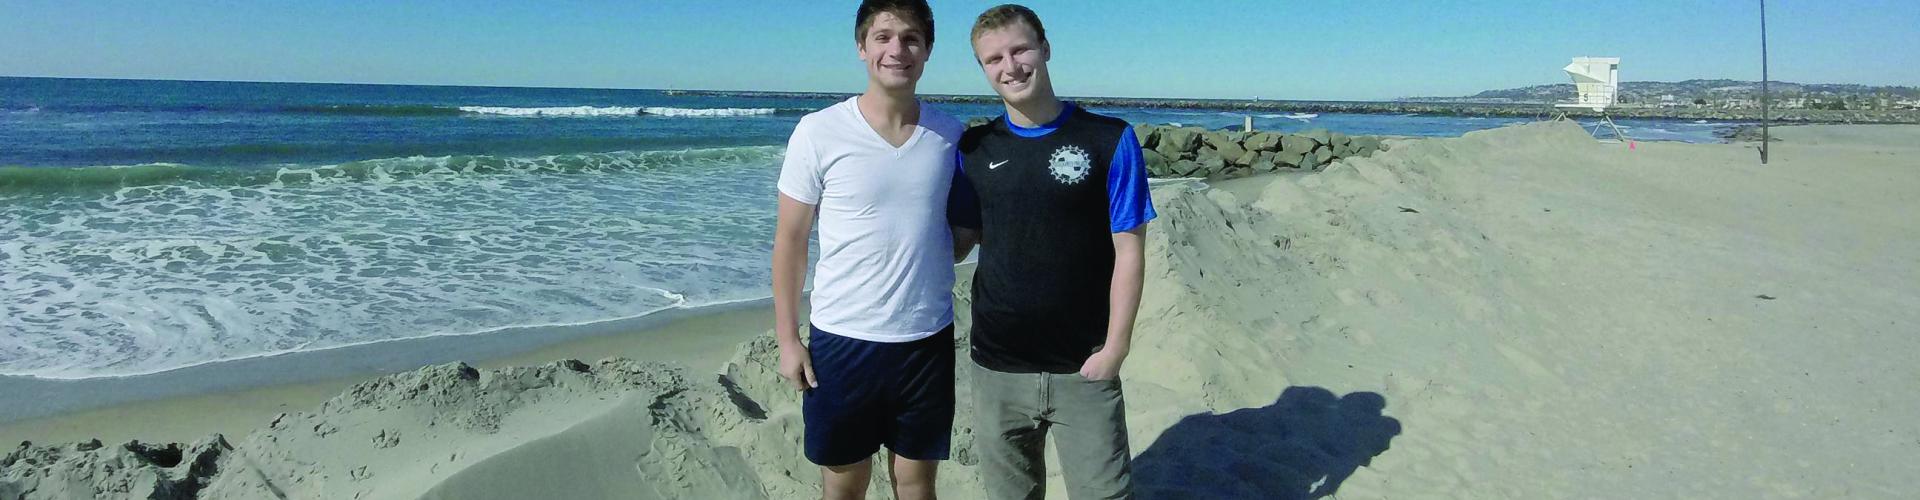 two male students posing at the beach